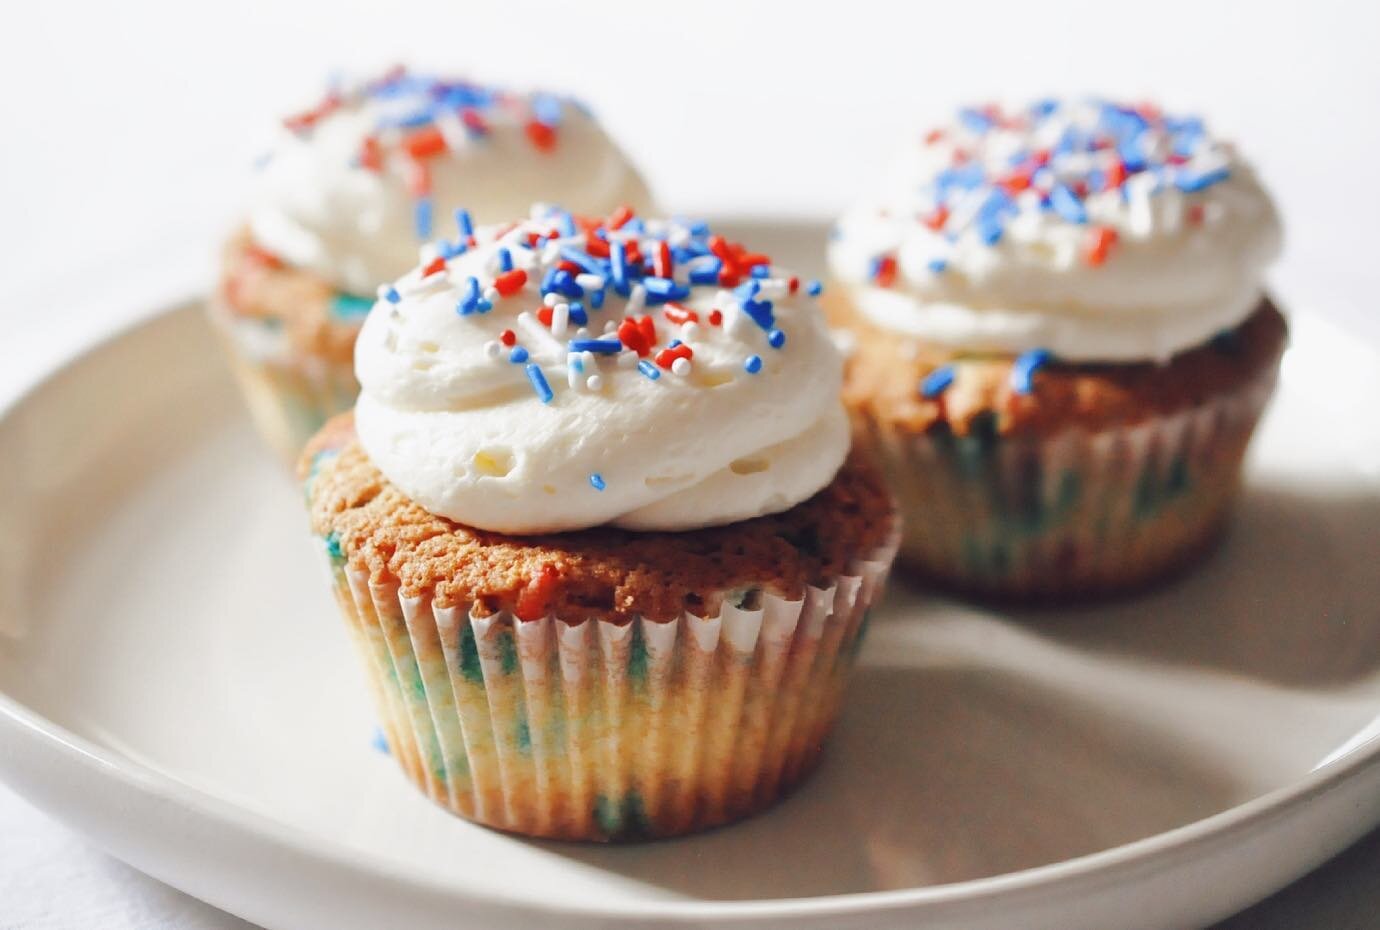 Today is the LAST DAY to place orders for 4th of July! Give us a call or send us an email to reserve all your funfetti cupcakes, cakes, crisps, &amp; sugar cookies for the weekend 😋💥🇺🇸